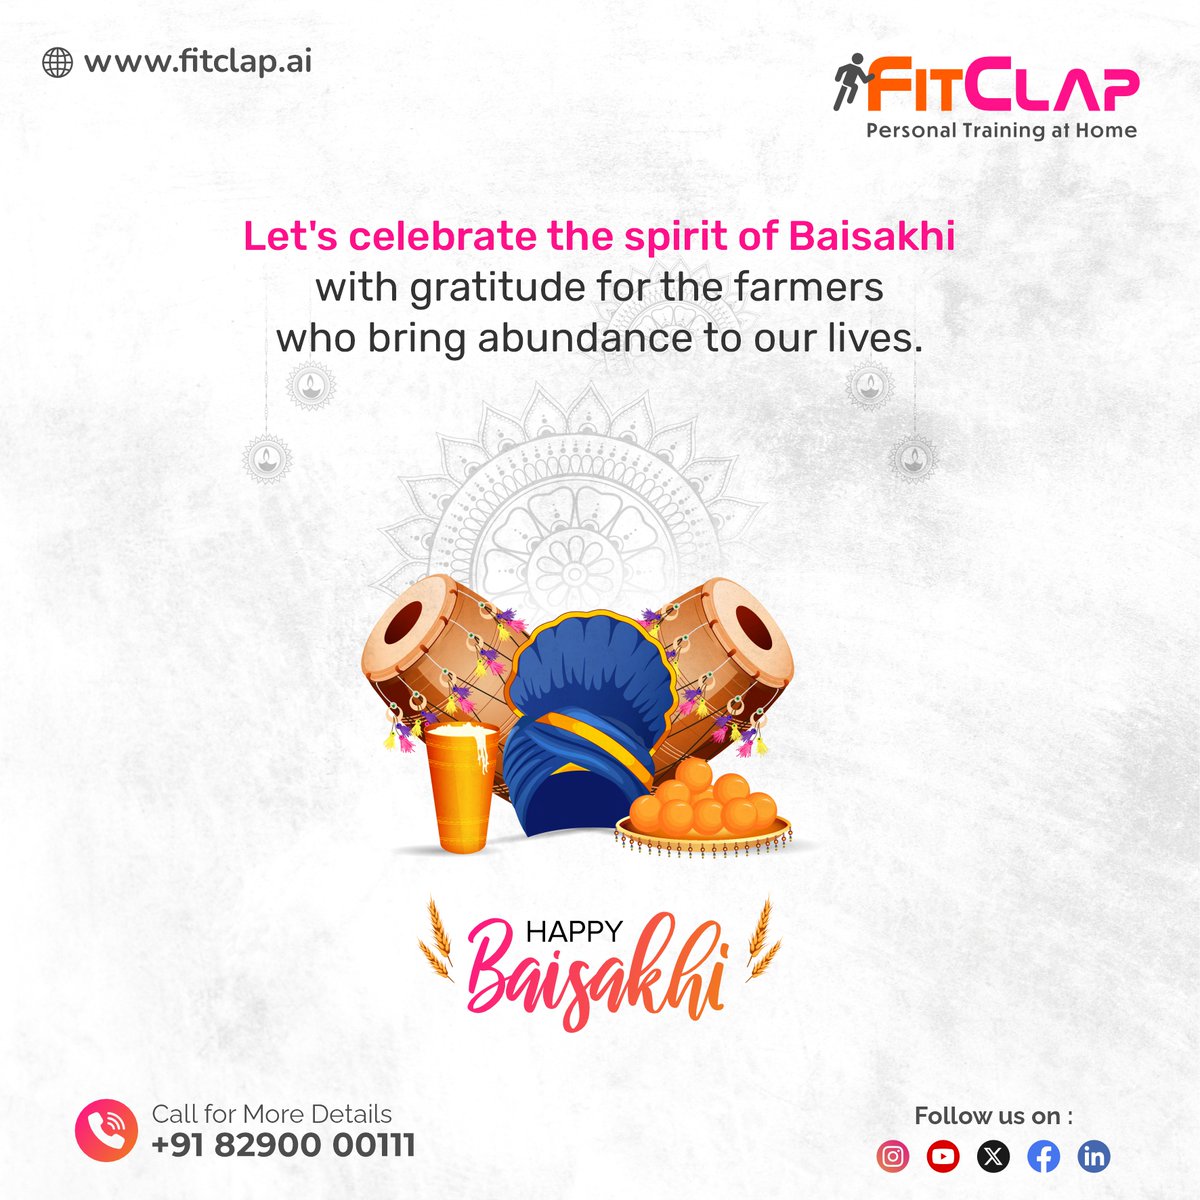 Happy Baishakhi from FitClap! 🌾💪 Join us in celebrating renewal and vitality as we embark on our fitness journey together.
 
Visit - fitclap.ai
Dial 📞 +91 82900 00111

#FitClap #Baishakhi #FitnessJourney #WorkoutAtHome #HomeFitness #FreeTrial #GetFitAtHome